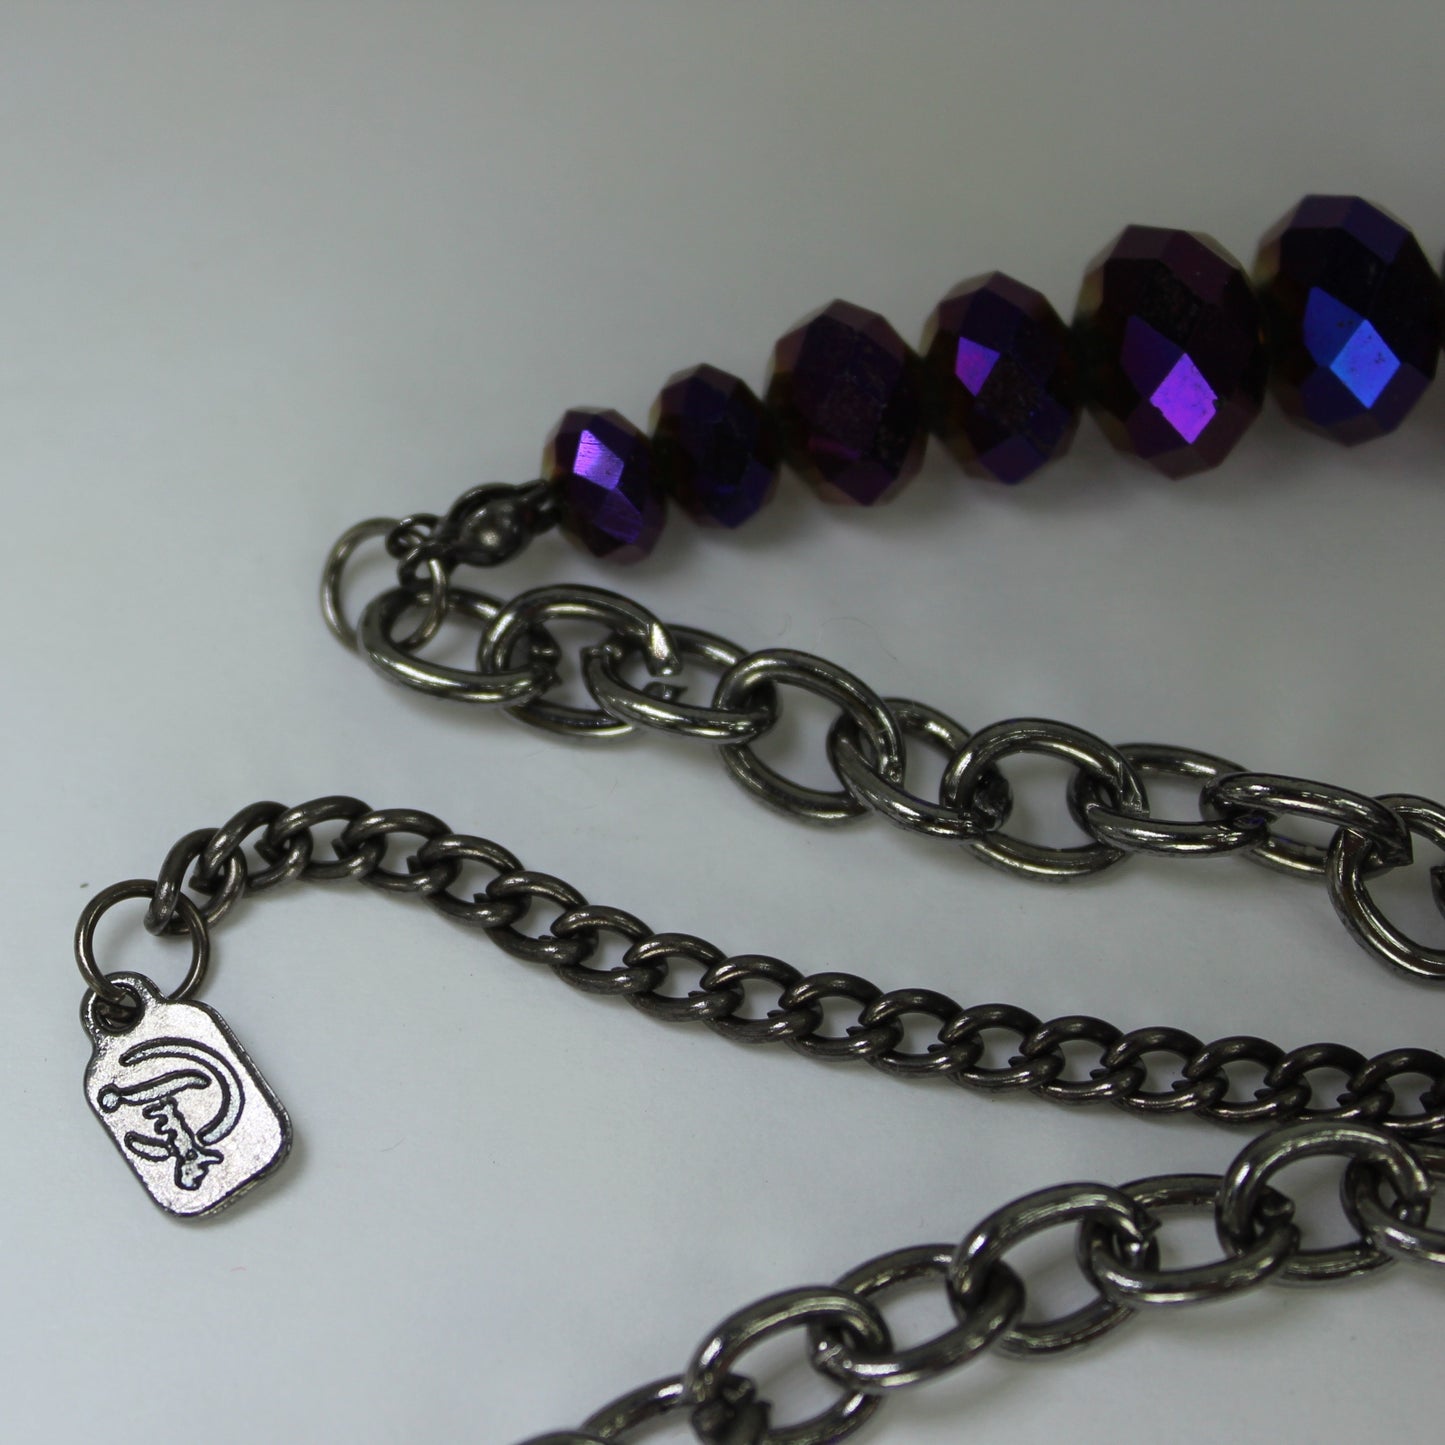 Designed signed Necklace Amethyst Crystal & Iridescent Cut Beads Alive with Sparkle closeup of metal maker tag looks like scotty dog